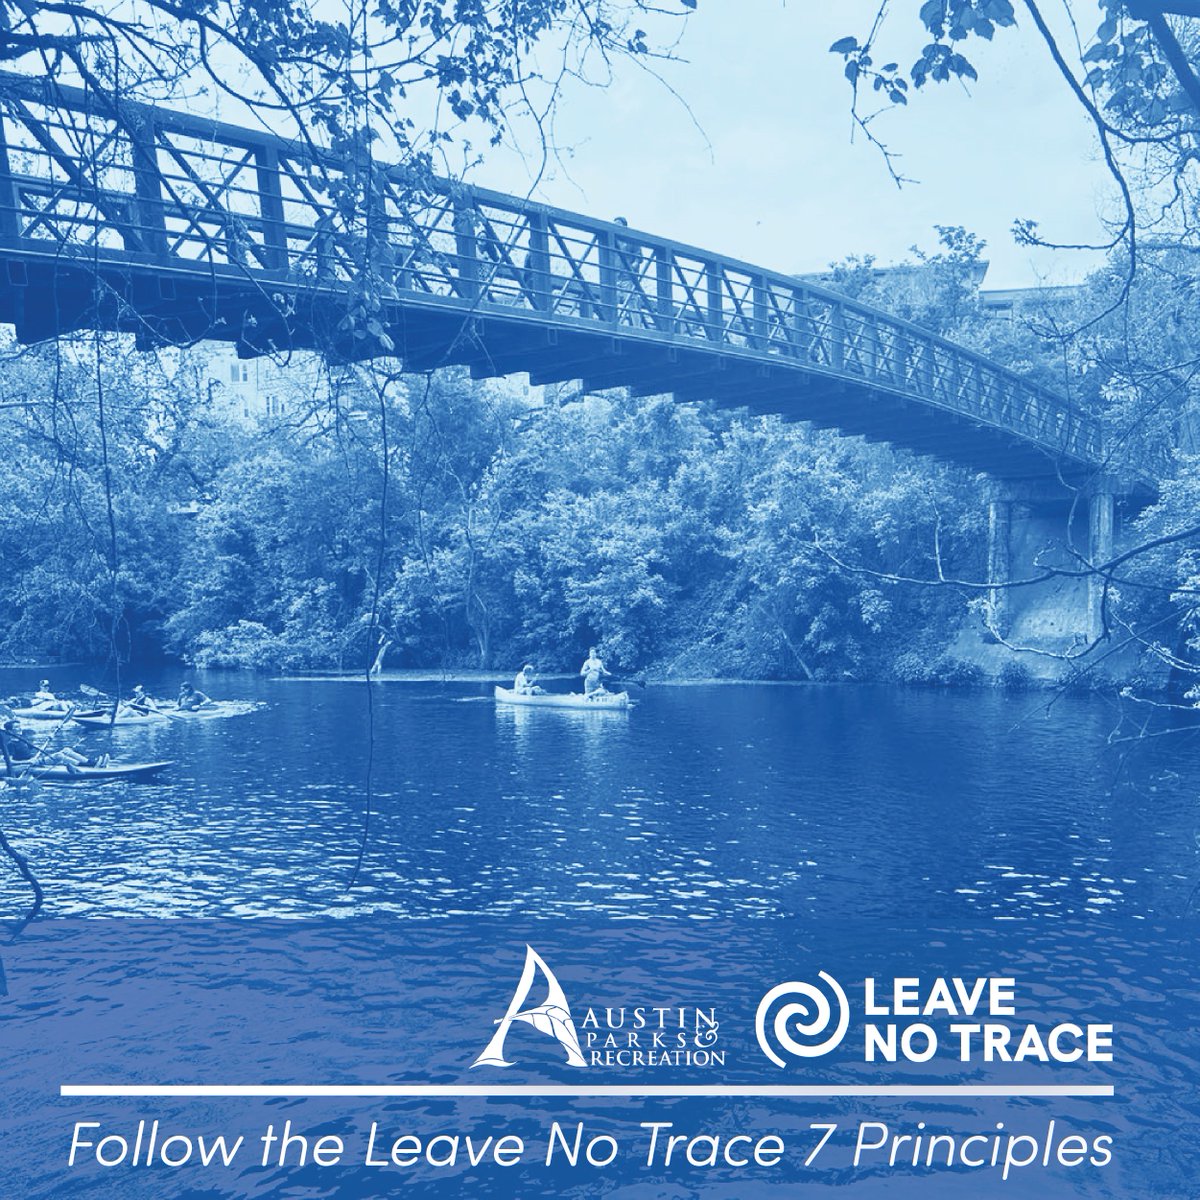 Each year bridge jumpers get injured when they hit the water and boaters get injured from being hit by a person jumping. Remember, it's illegal to jump from Austin's bridges and to swim in Lady Bird Lake. Be considerate, be safe. Leave No Trace learn more: AustinTexas.gov/LeaveNoTrace